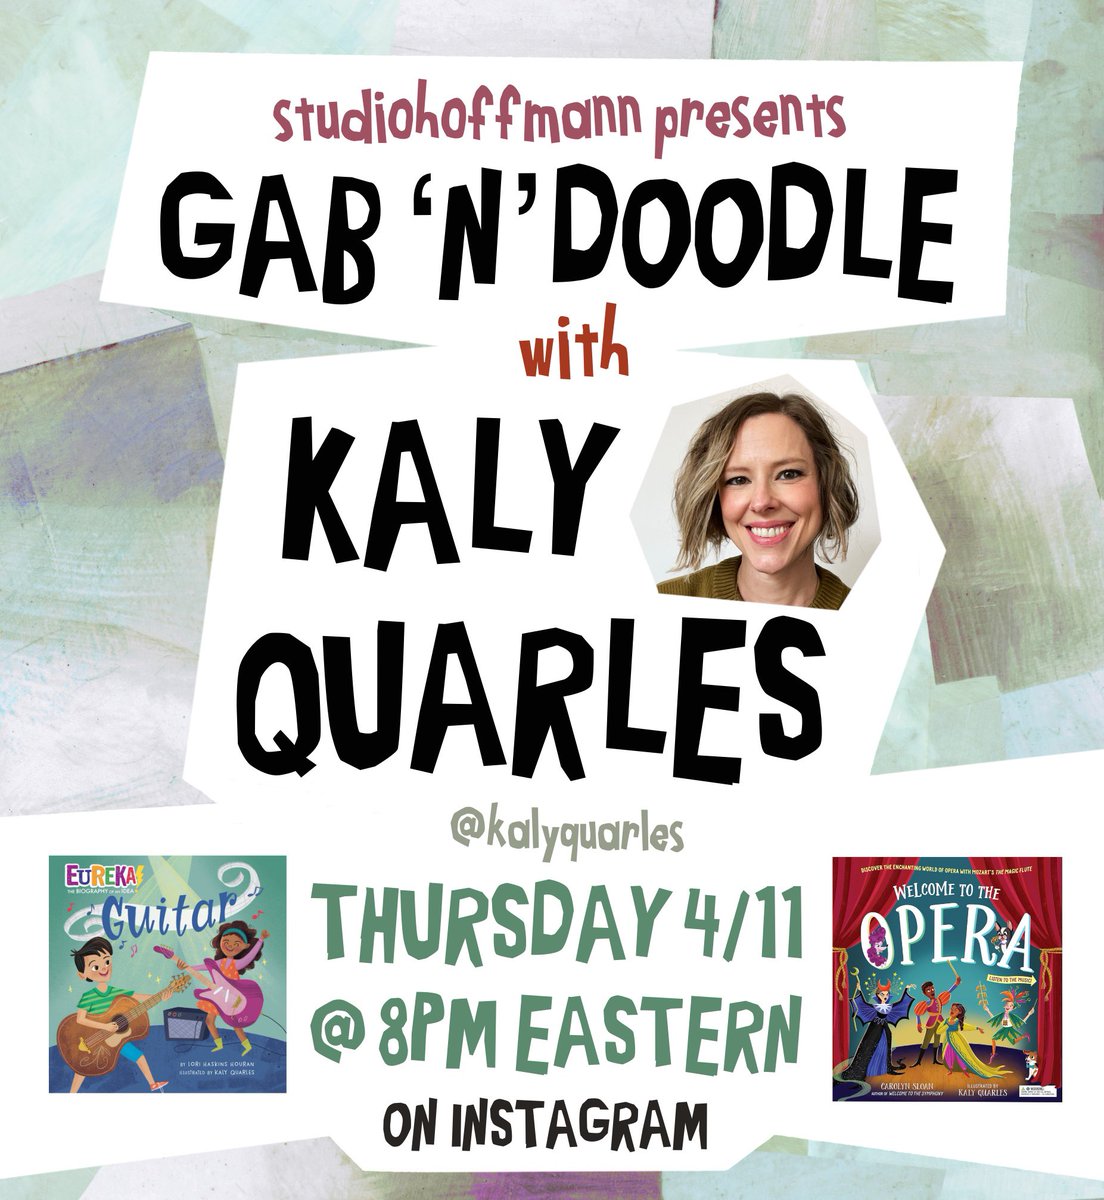 This Thursday night , at 8pm eastern, I’ll be joined on insta live by the marvelous illustrator Kaly Quarles @kalyquarles Kaly makes art that is fresh with a classic vibe. . #kalyquarles #gabndoodle #kidlit #kidlitart #kidlitillustration #kidlitillustrators #illustration